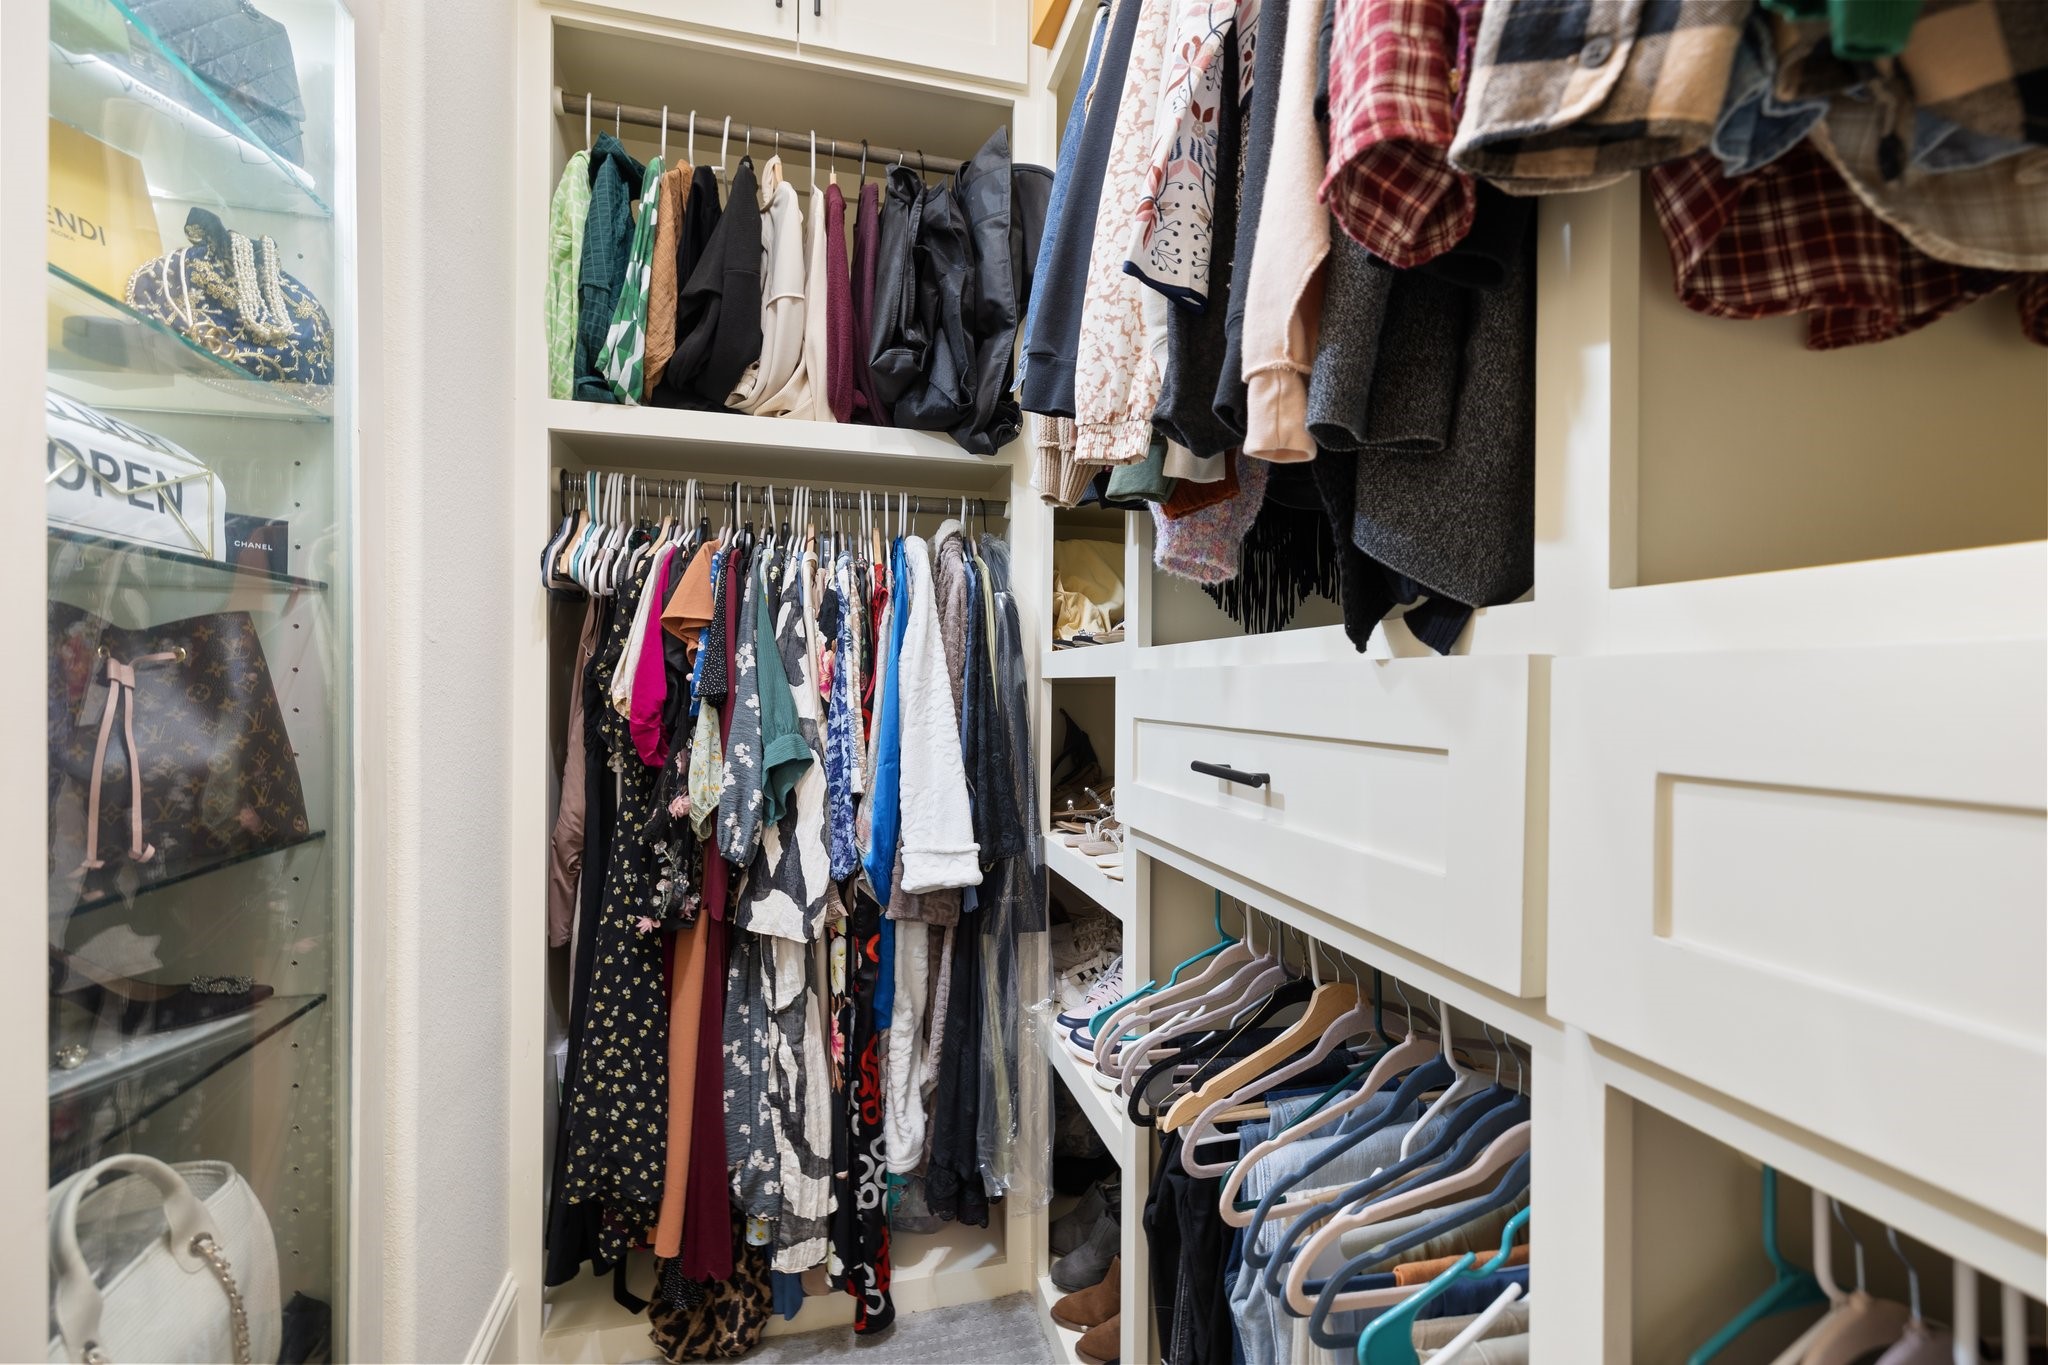 The primary closet has been customized to increase functionality and storage!